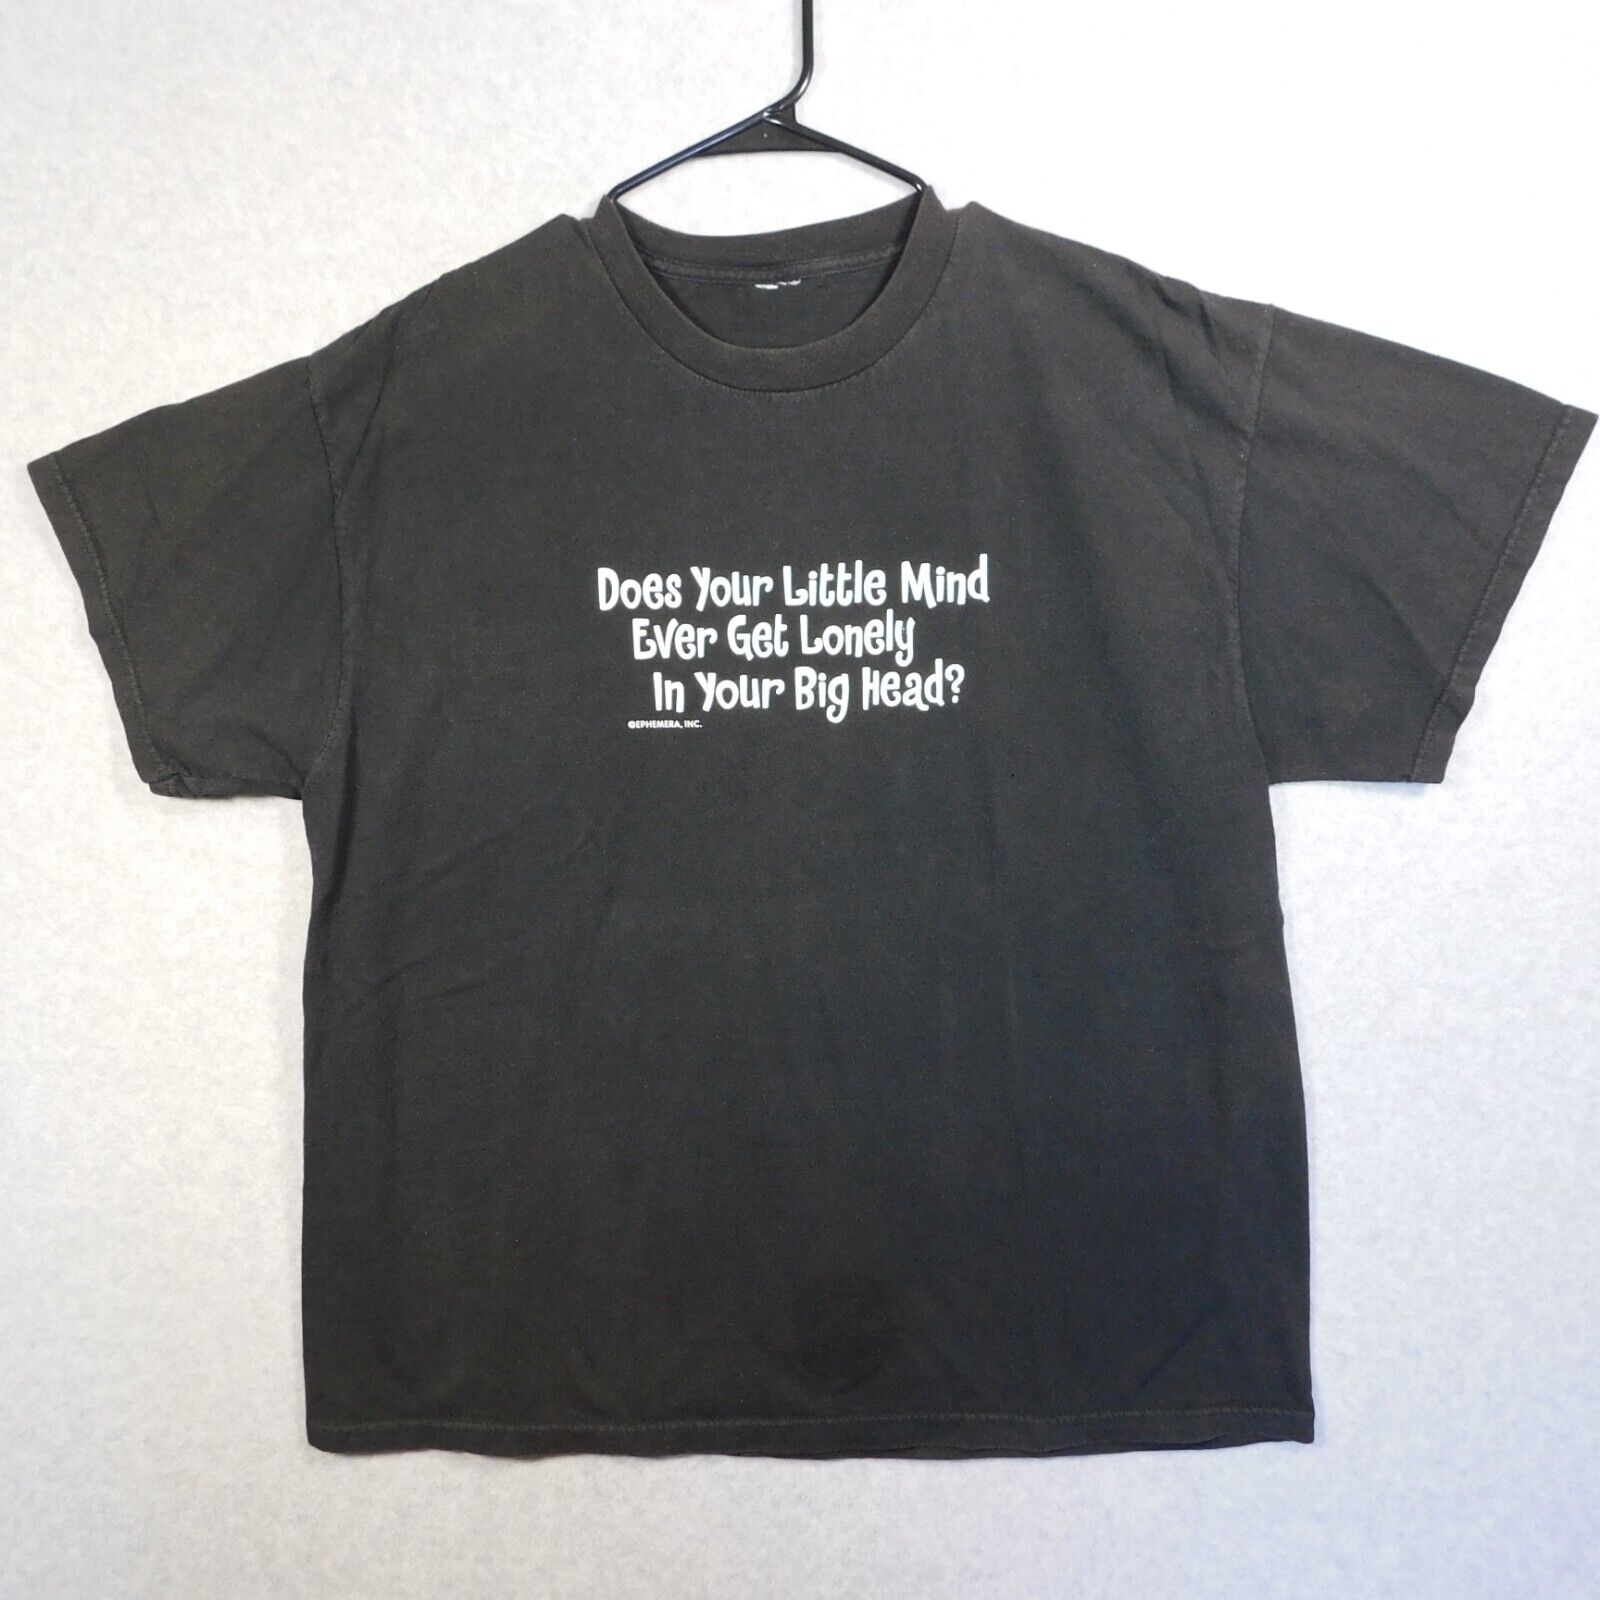 Vintage Ephemera Shirt Adult Extra Large Black 90s Funny Quote Faded Distressed